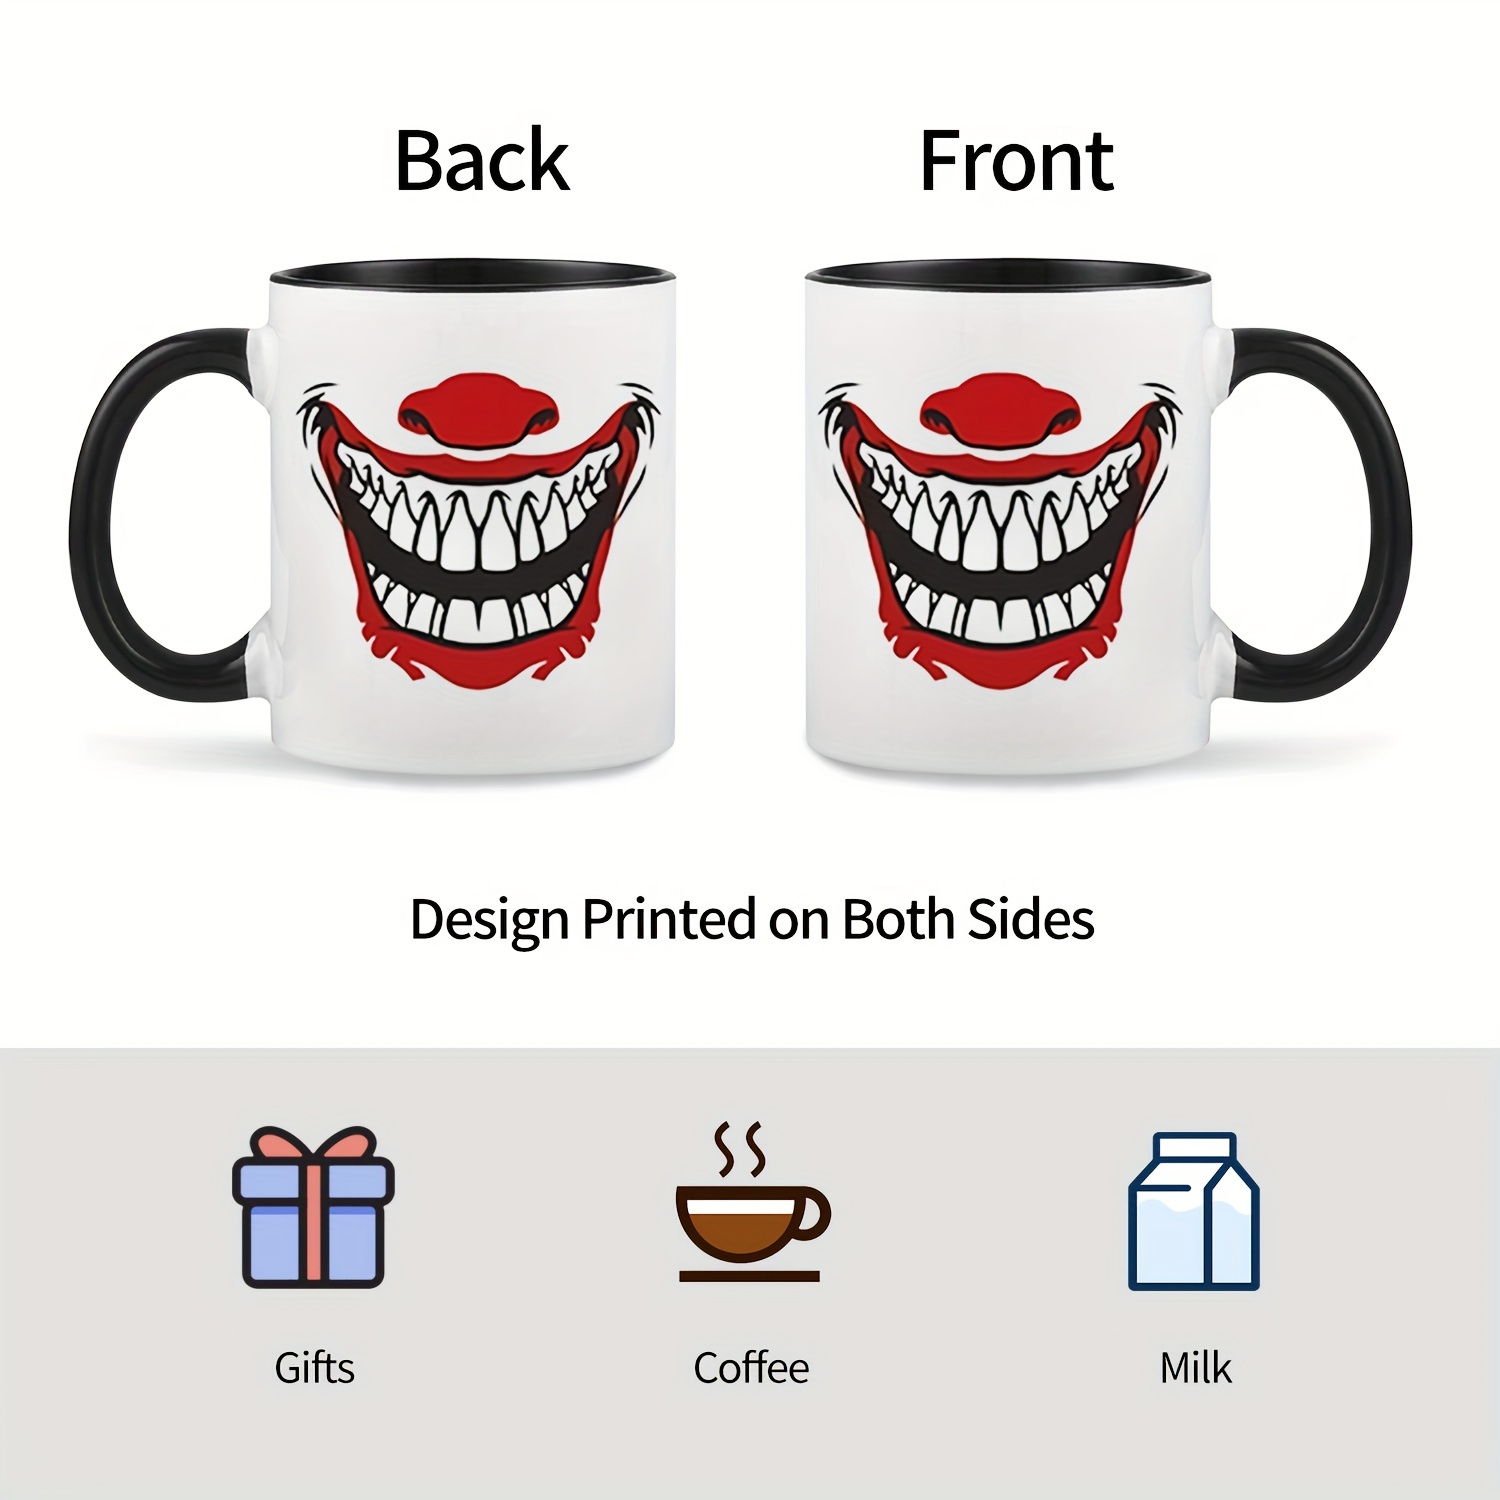 1pc We Are All Mad Here Halloween Ceramic Coffee Mug 11oz Gift For Men  Women Halloween Christmas Birthday Mother Father Friends